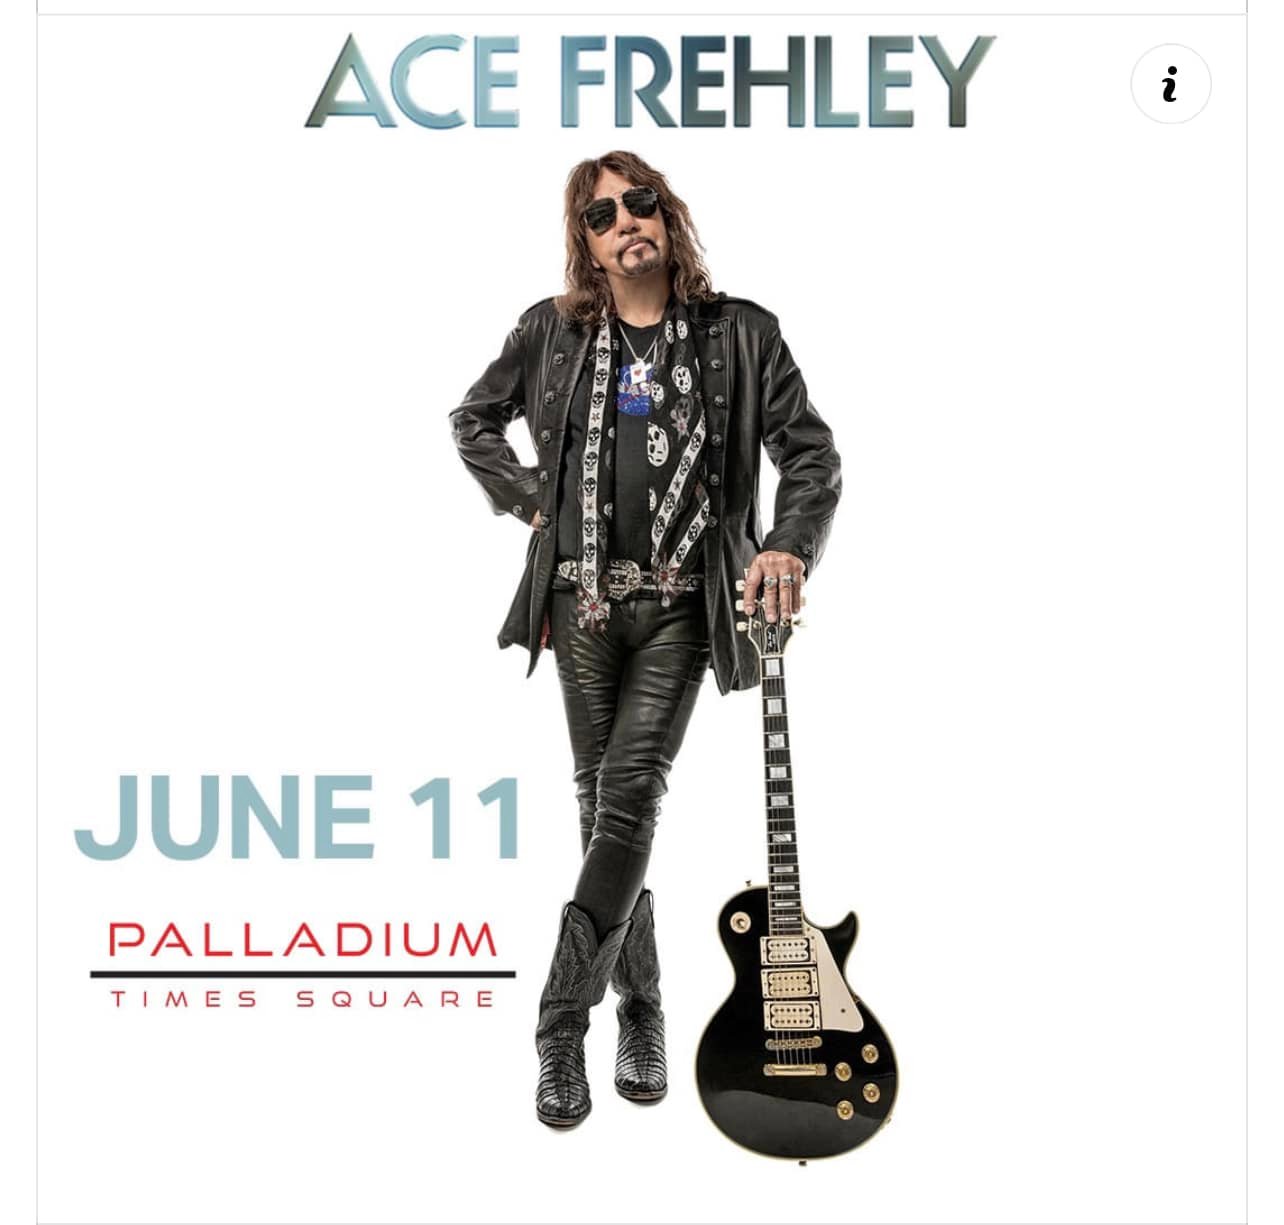 ACE FREHLEY Fan filmed video of the FULL SHOW Live Palladium Times